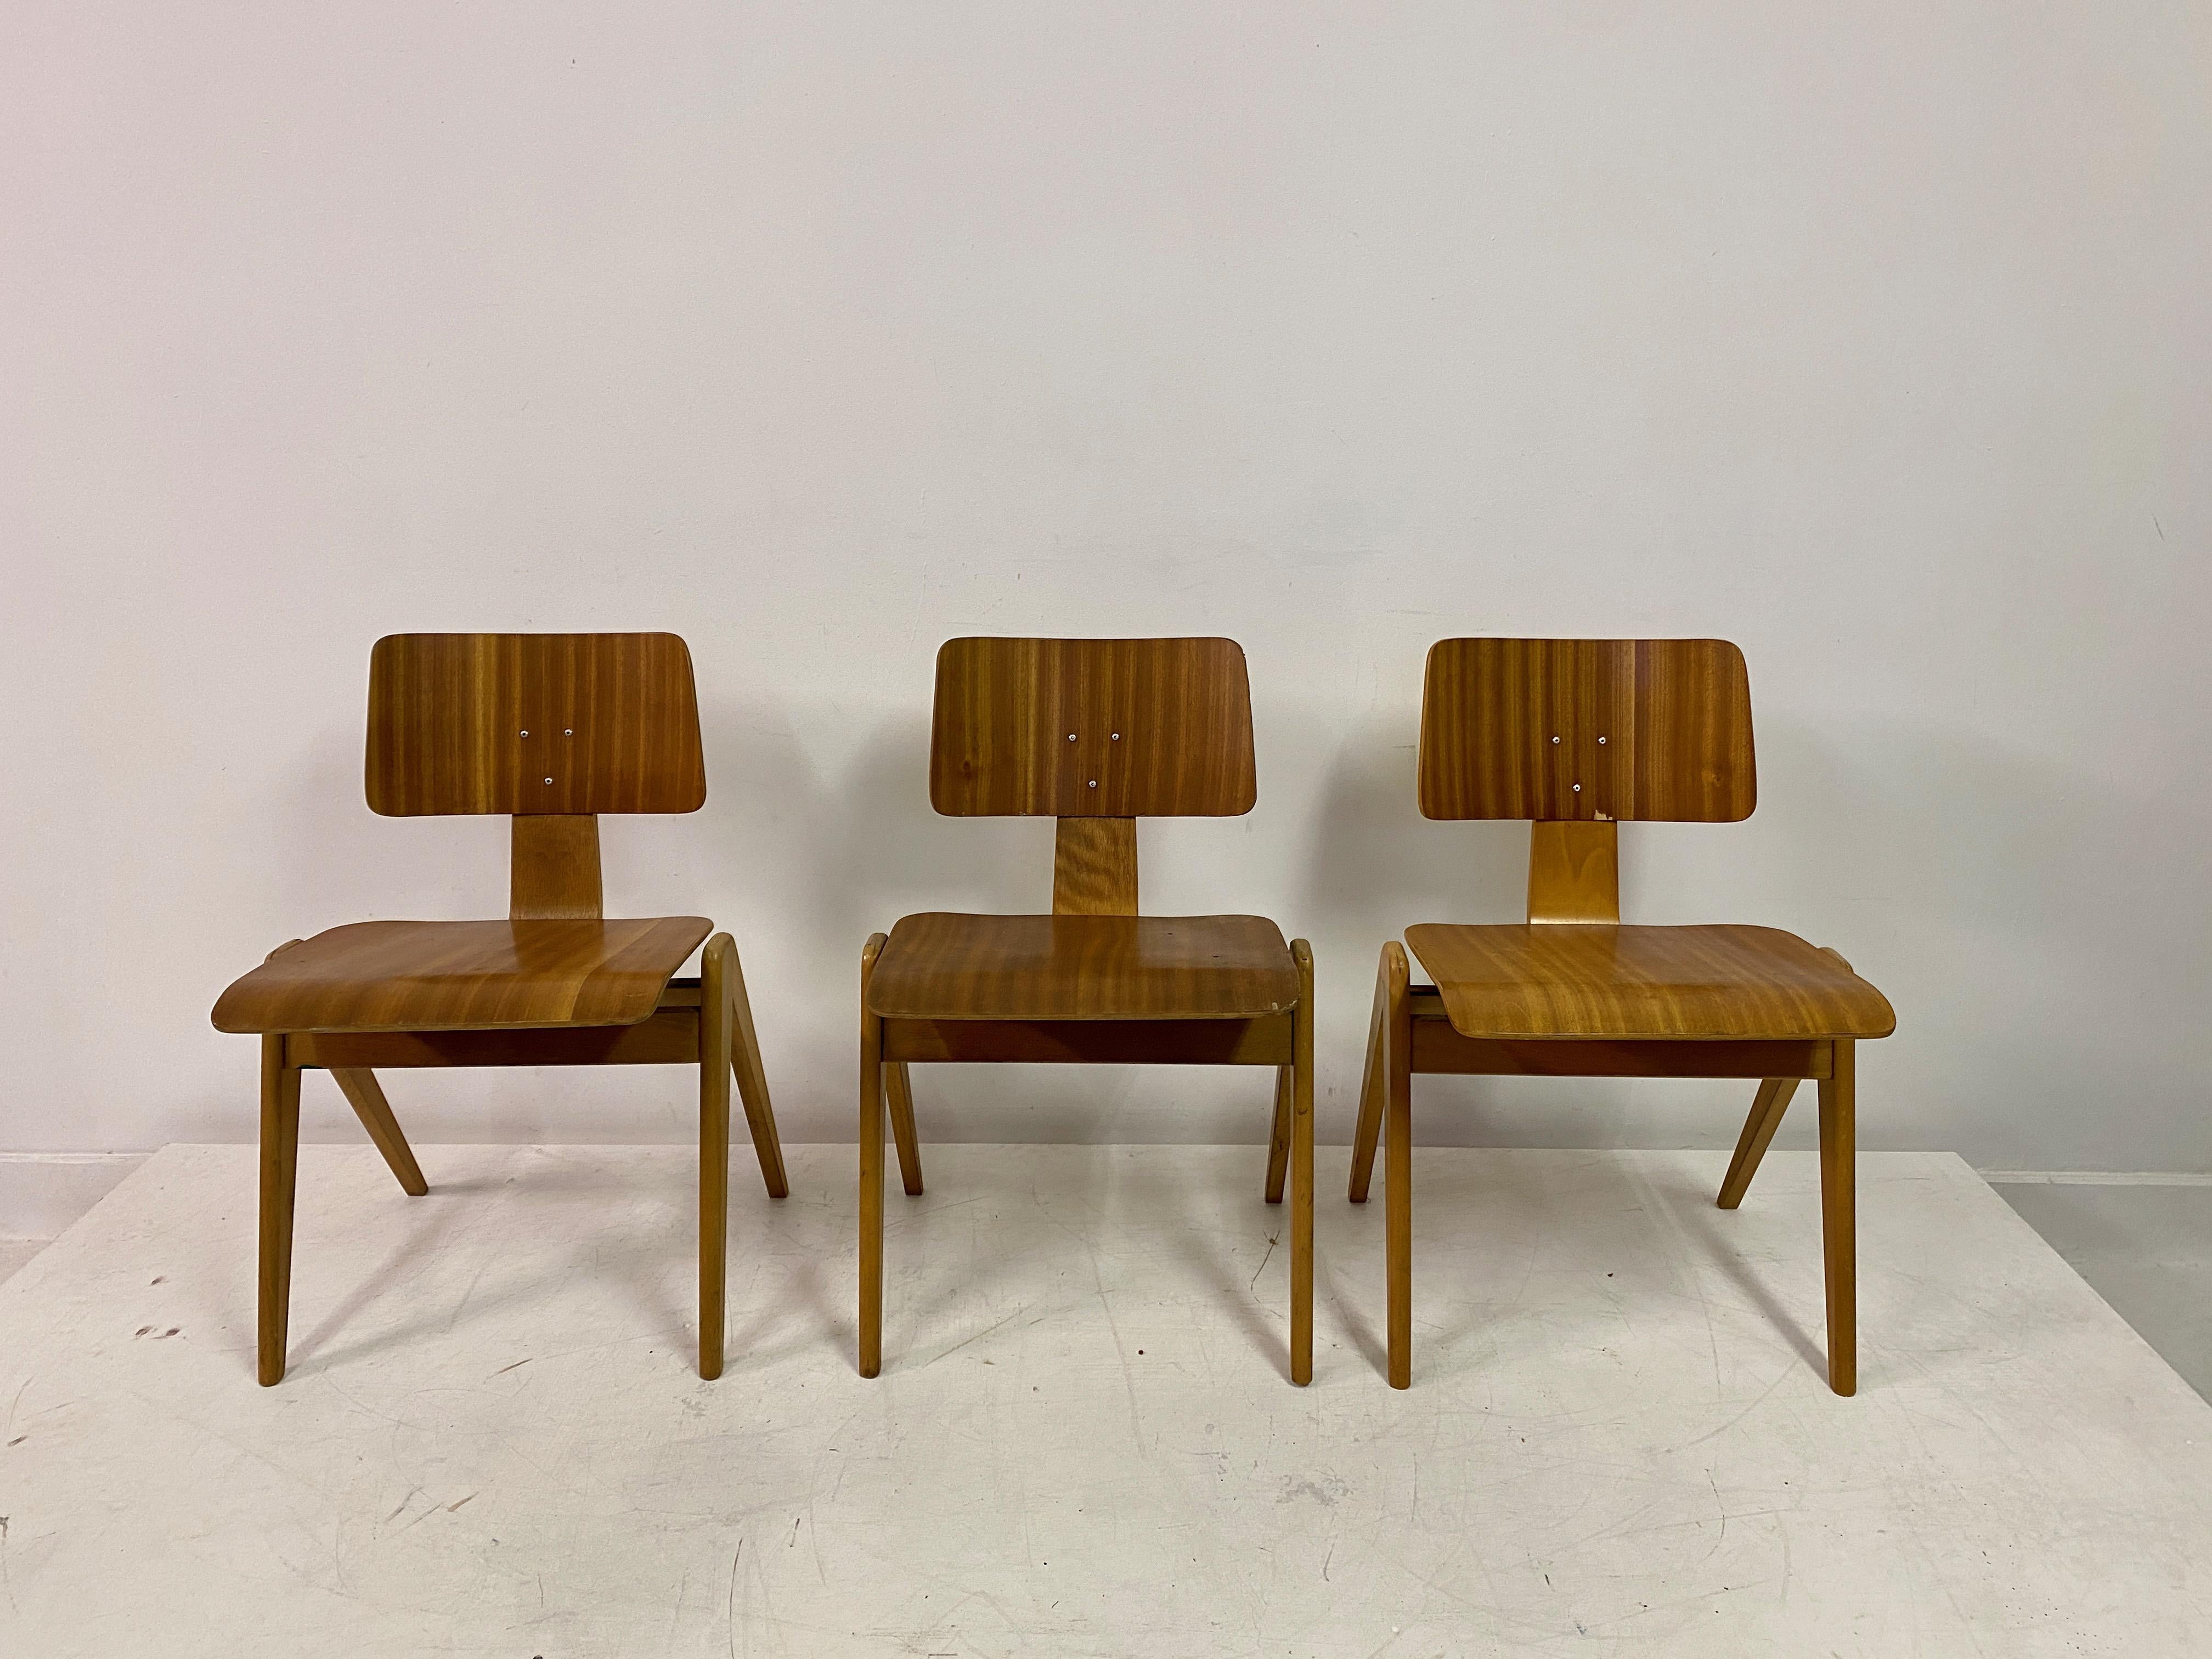 Three Hillestak chairs

Designed by Robin Day

Made by Hille

Can be stacked

Two with Hille labels

In original condition. These chairs haven't been restored so show signs of wear.

The frames remain strong and useable.

Seat height 44cm

Great